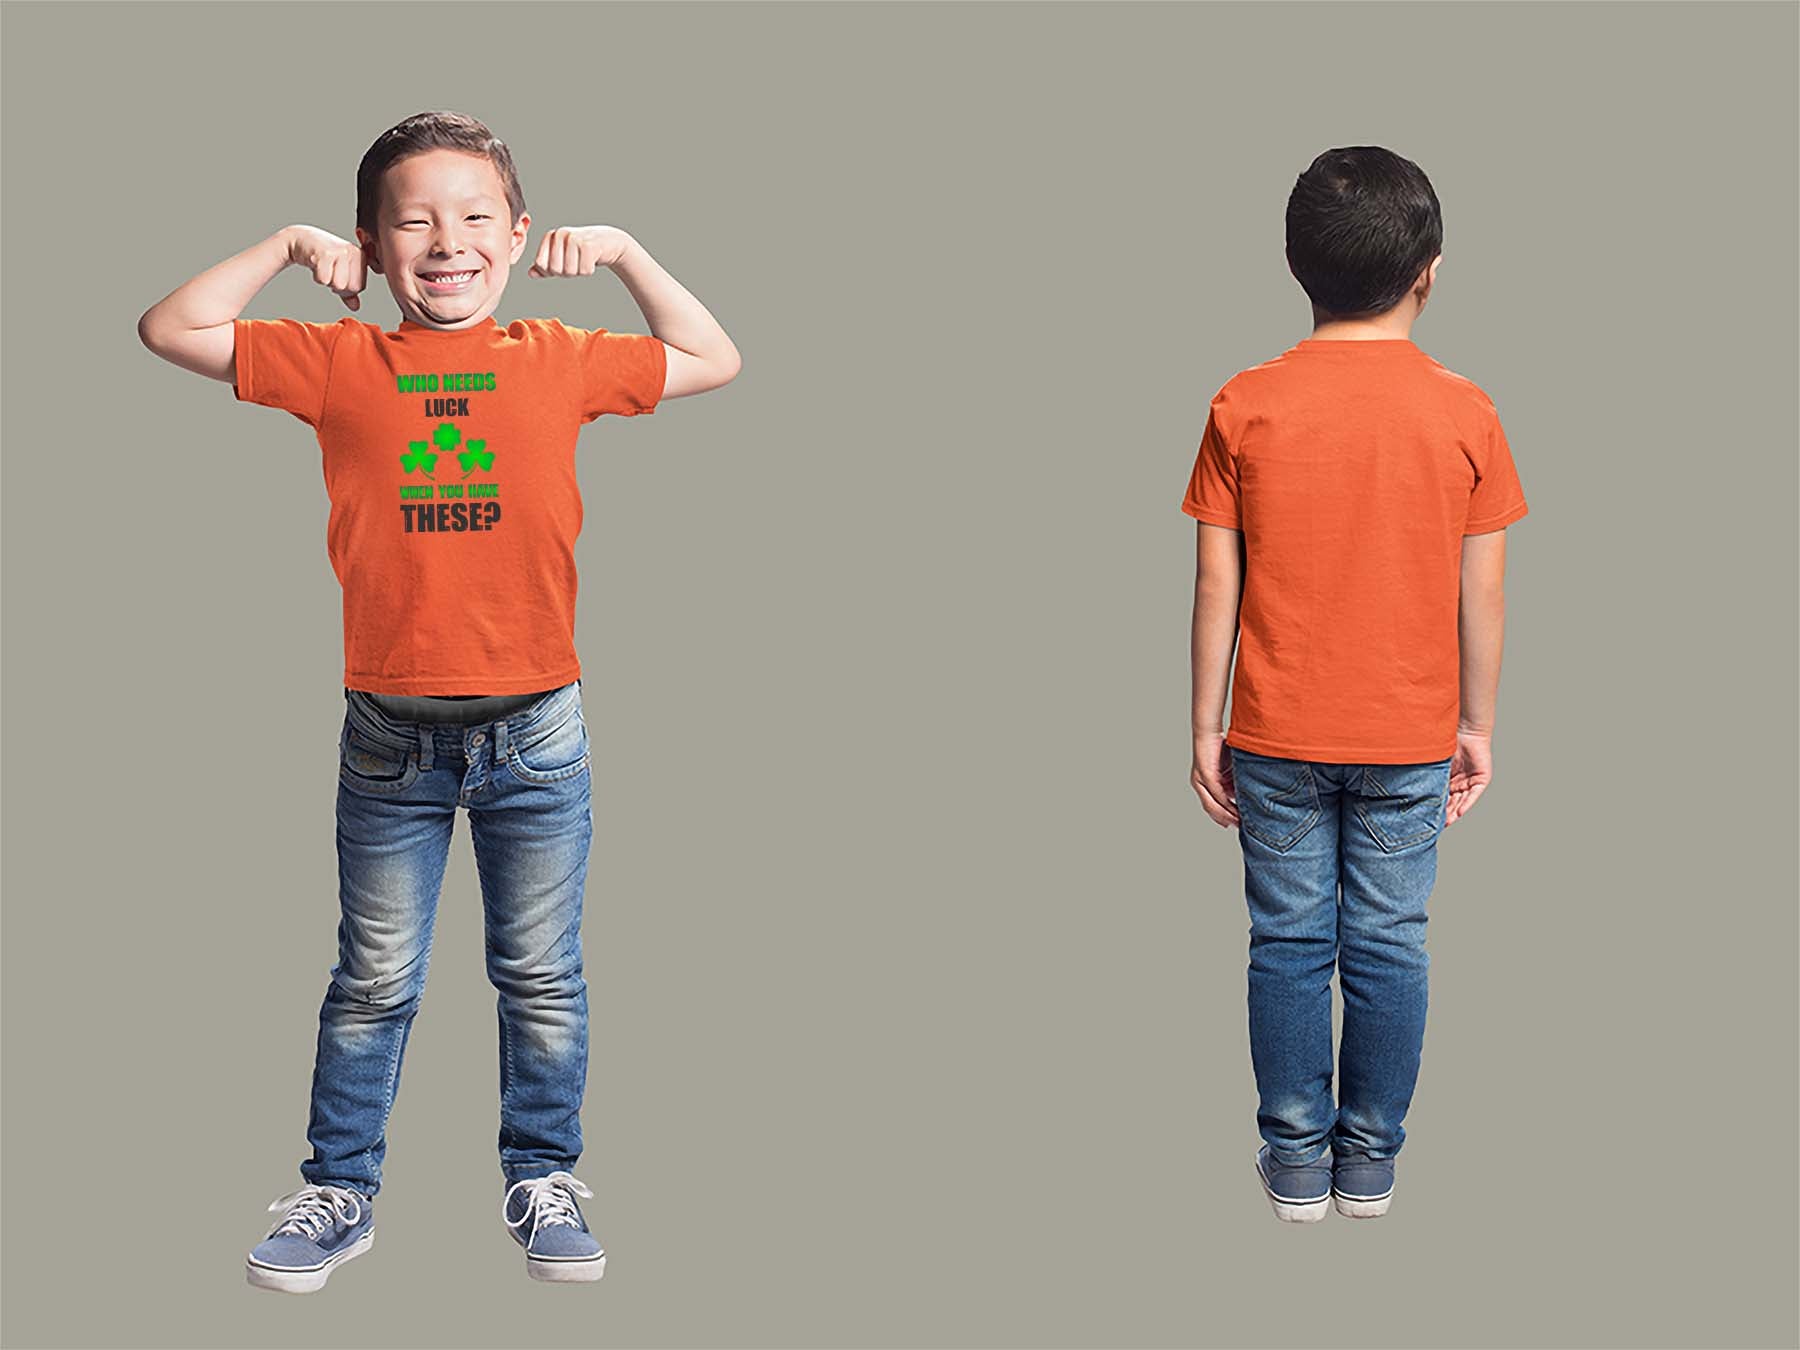 Who Needs Luck Youth T-Shirt Youth Small Orange